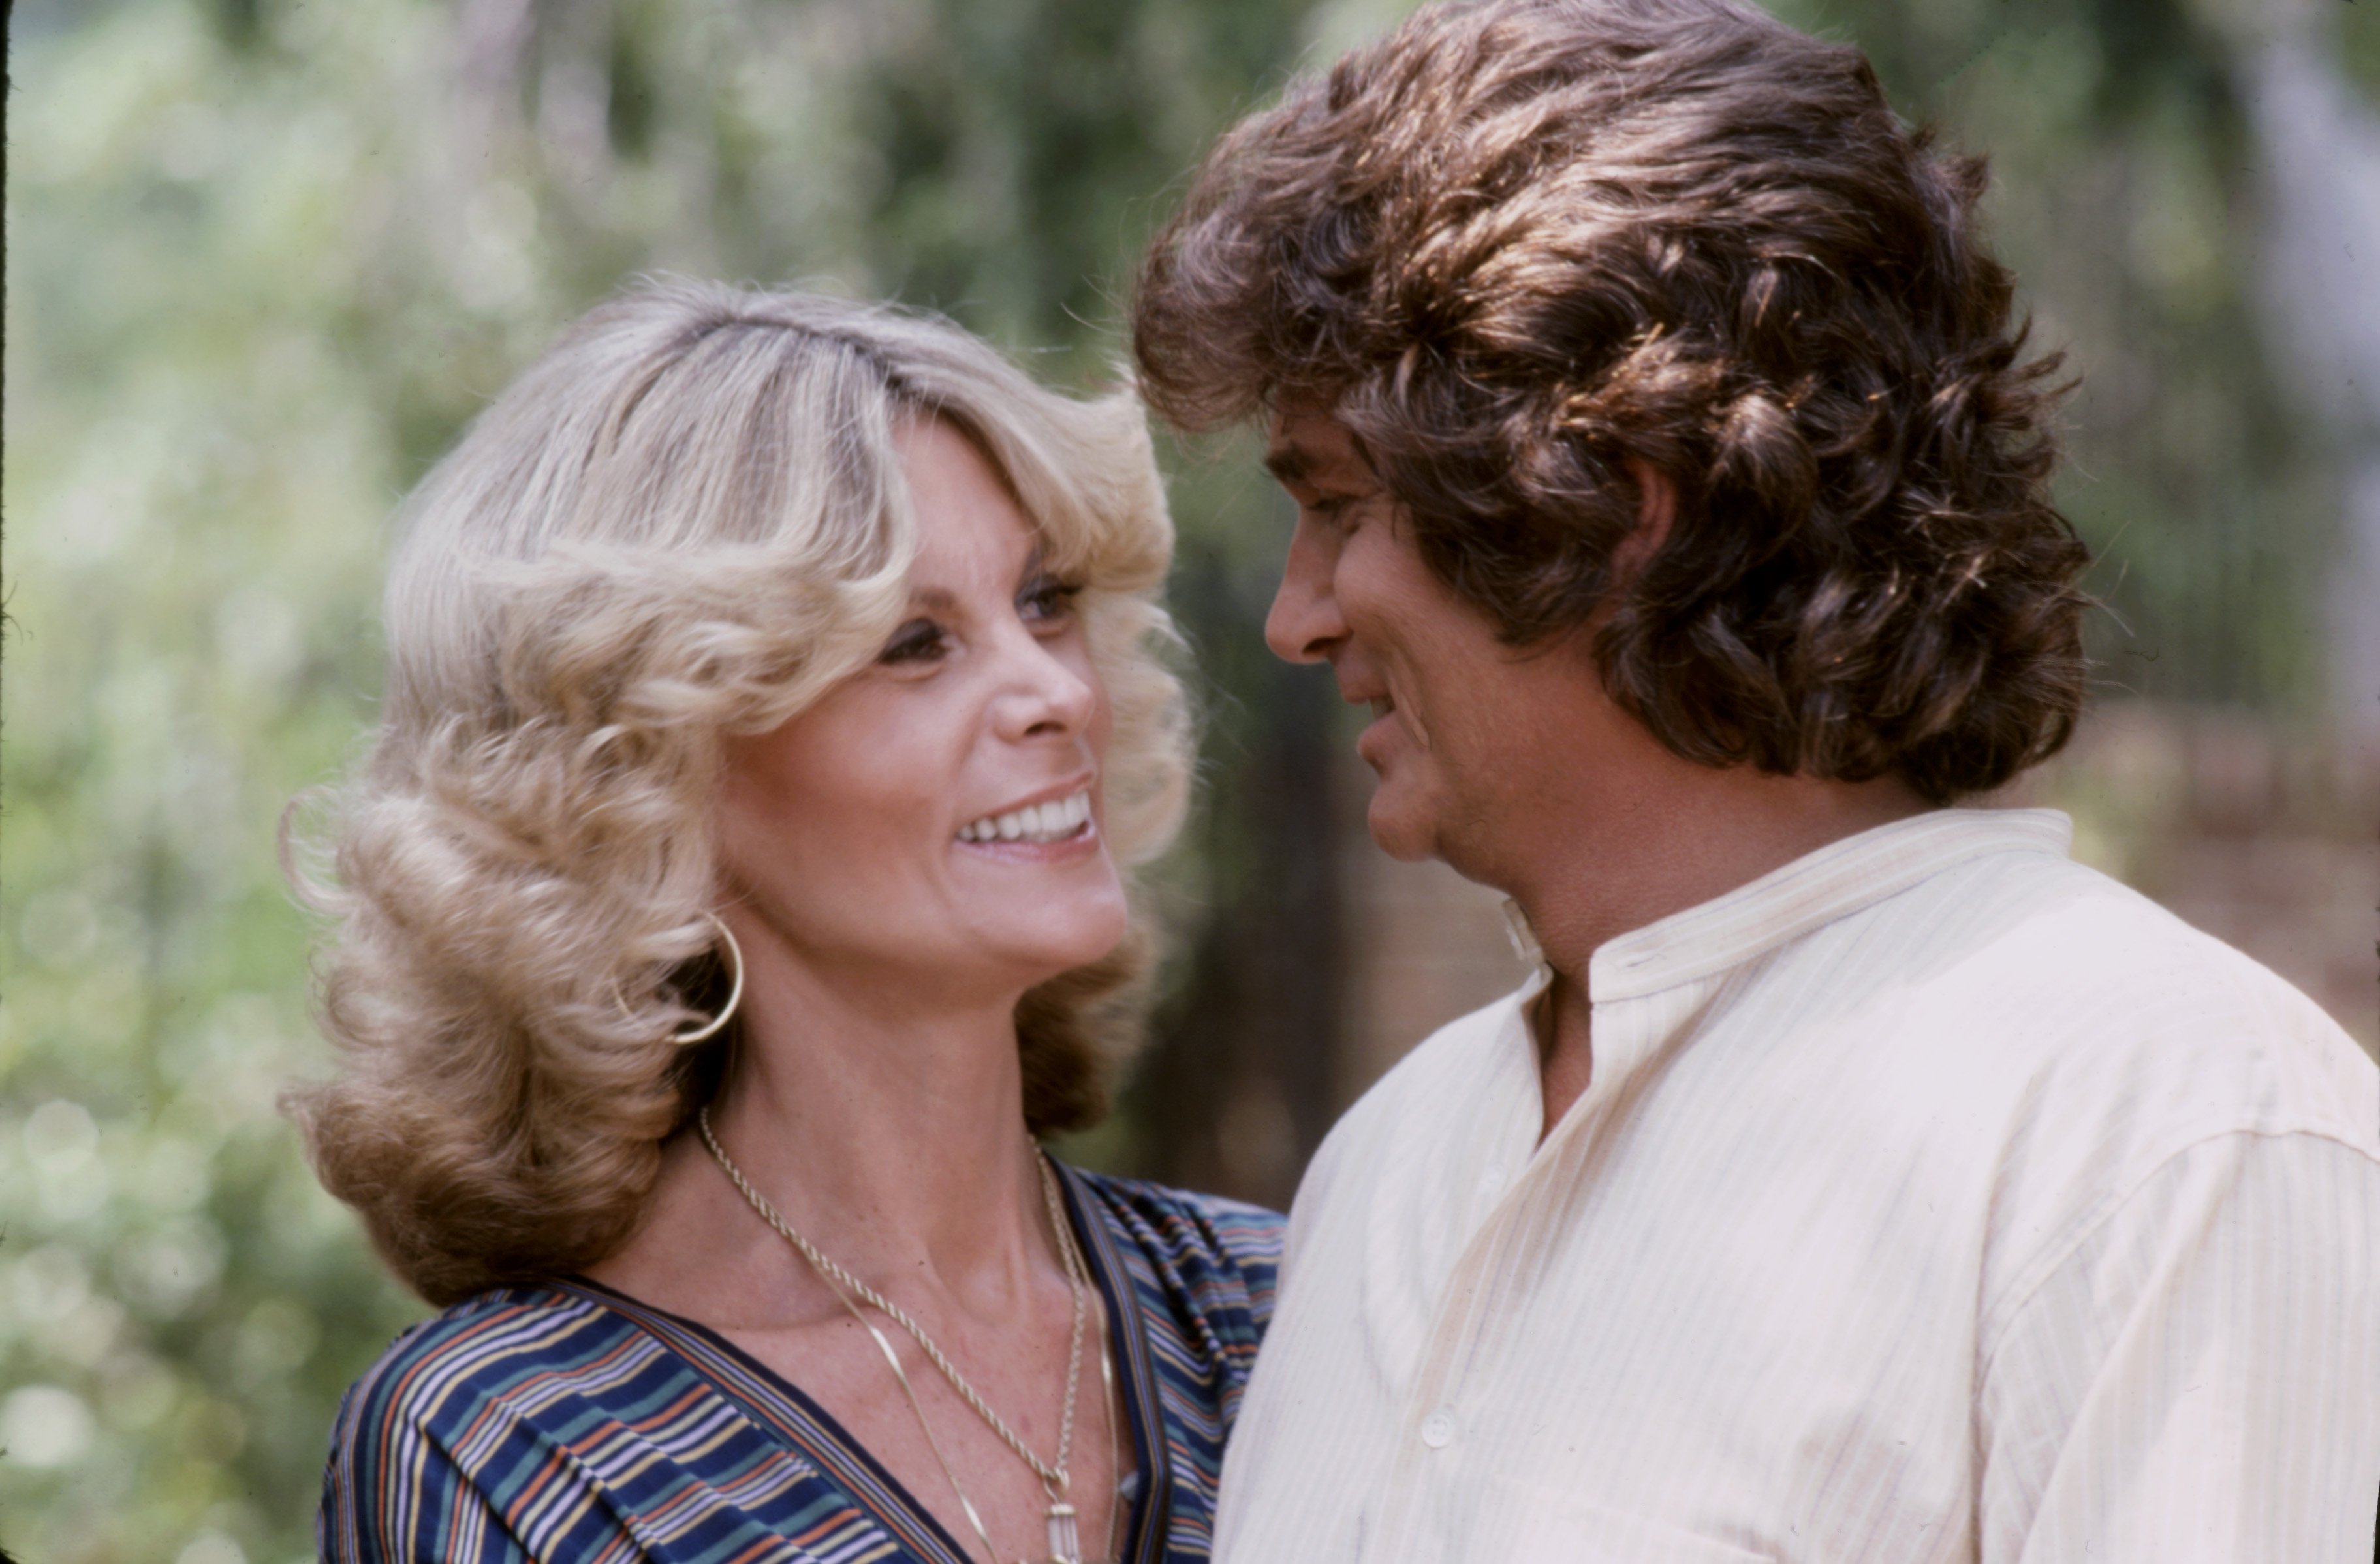 Lynn Noe Landon and spouse Michael Landon during their appearance on the ABC TV special "The Barbara Walters Special," in 1978. / Source: Getty Images